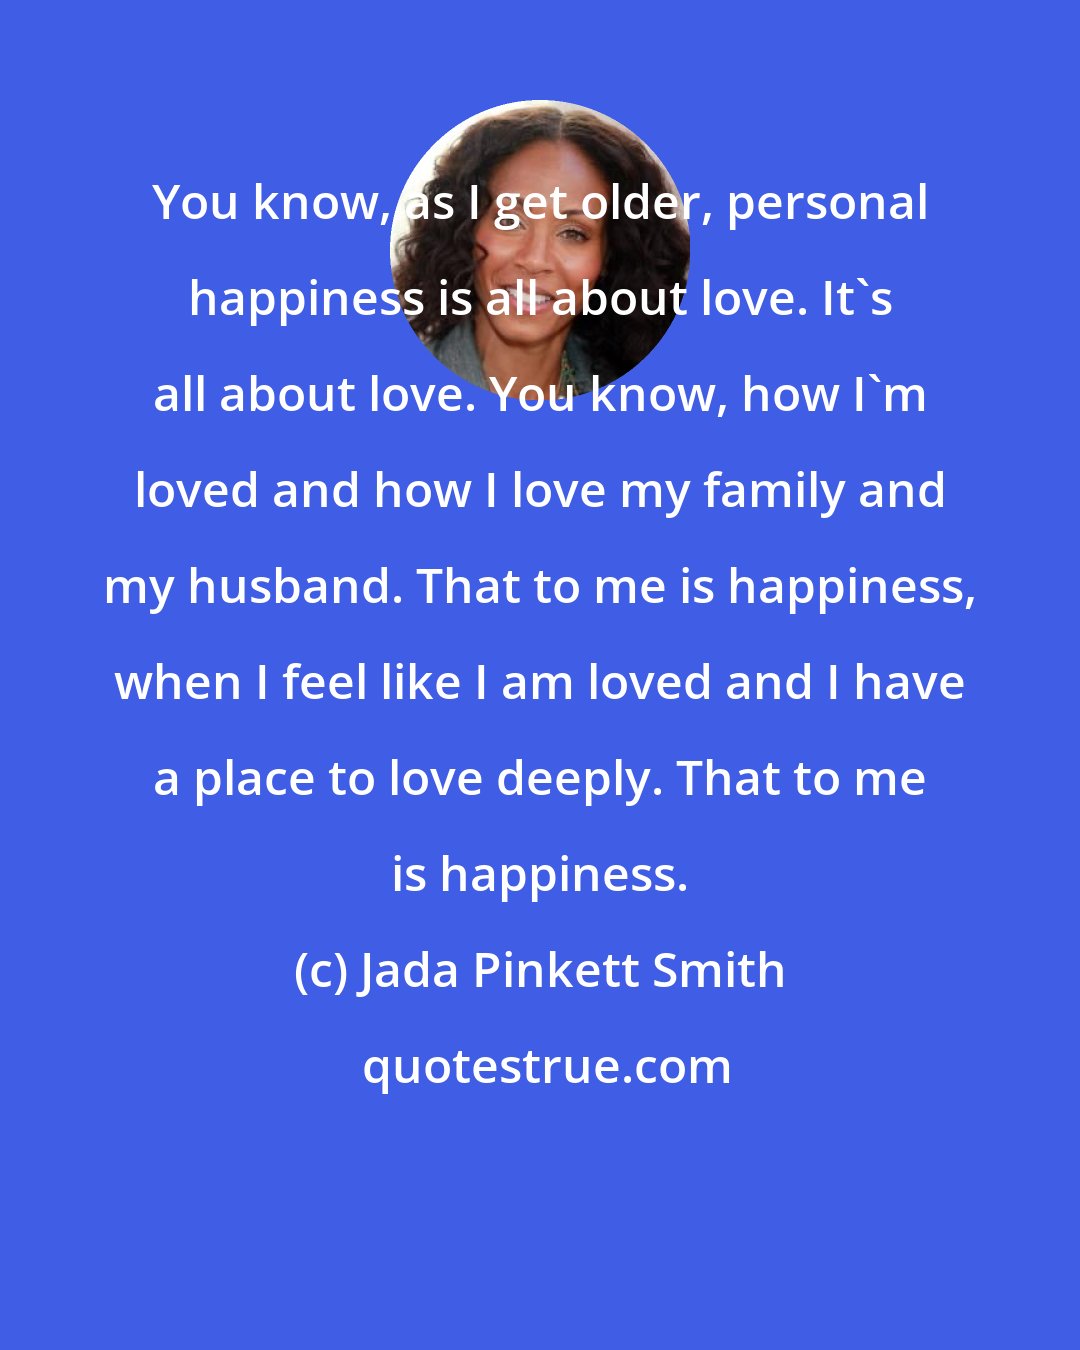 Jada Pinkett Smith: You know, as I get older, personal happiness is all about love. It's all about love. You know, how I'm loved and how I love my family and my husband. That to me is happiness, when I feel like I am loved and I have a place to love deeply. That to me is happiness.